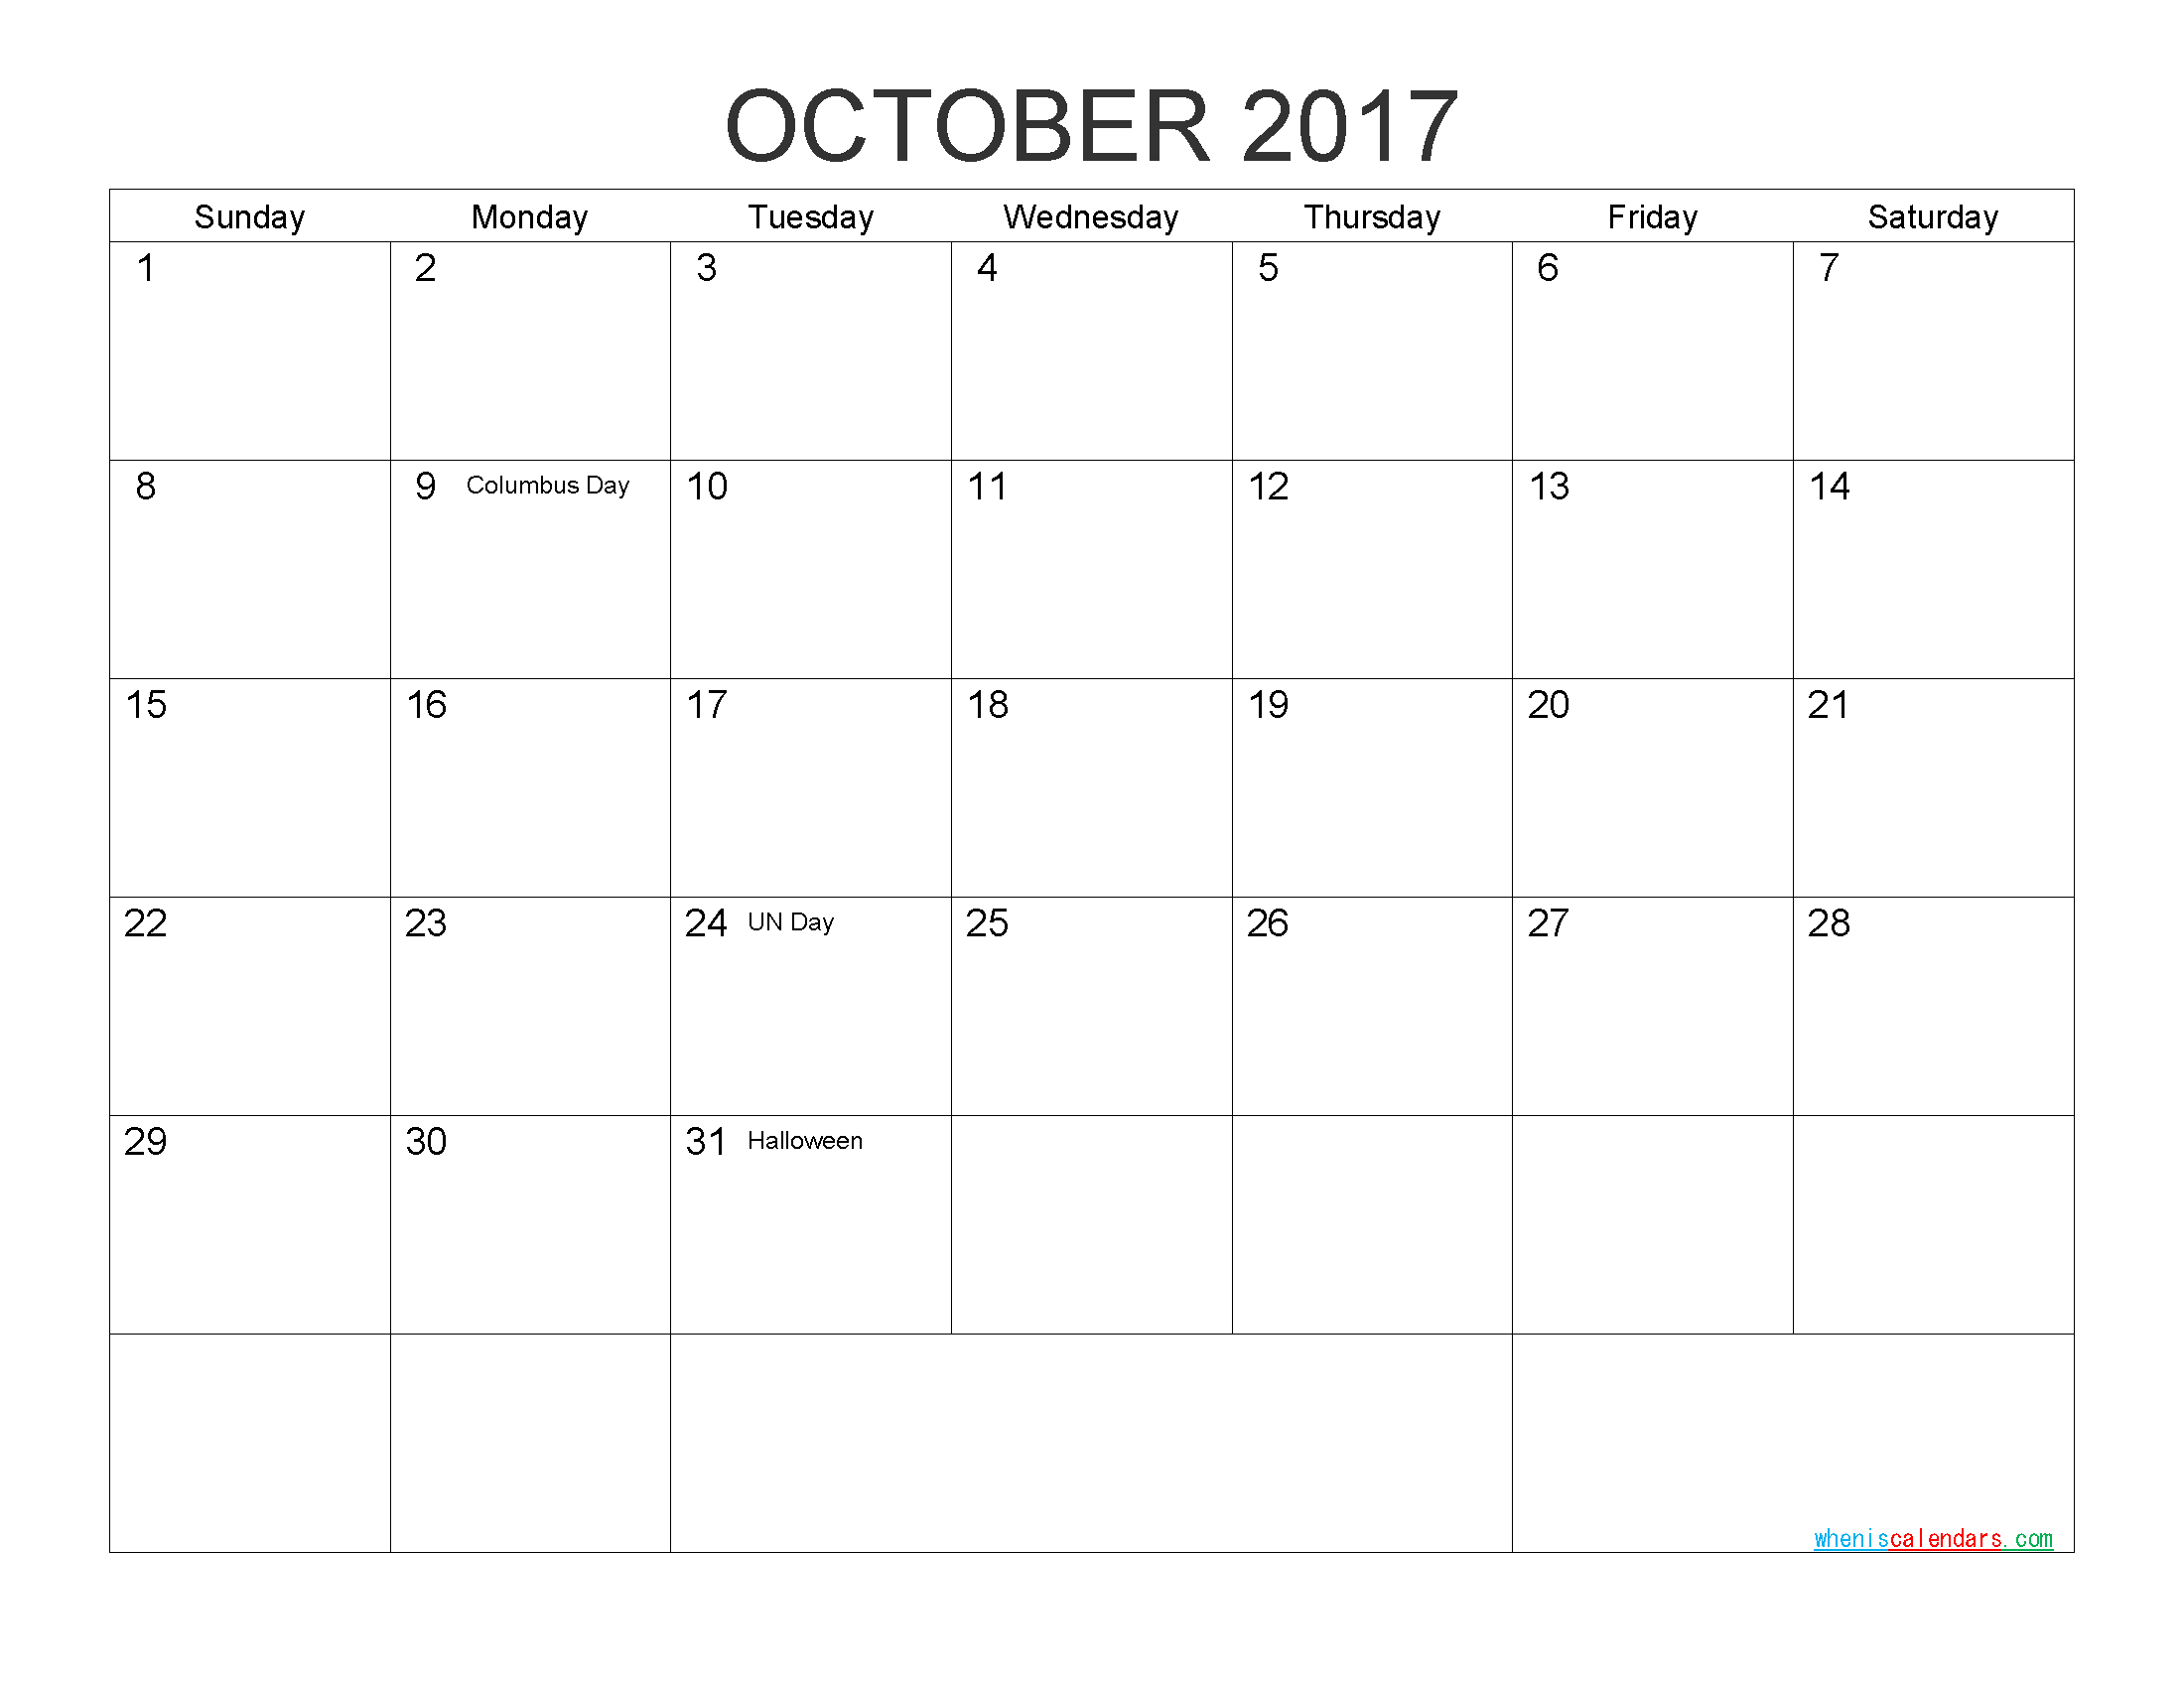 Free Printable Calendar October 2017 as PDF and Image